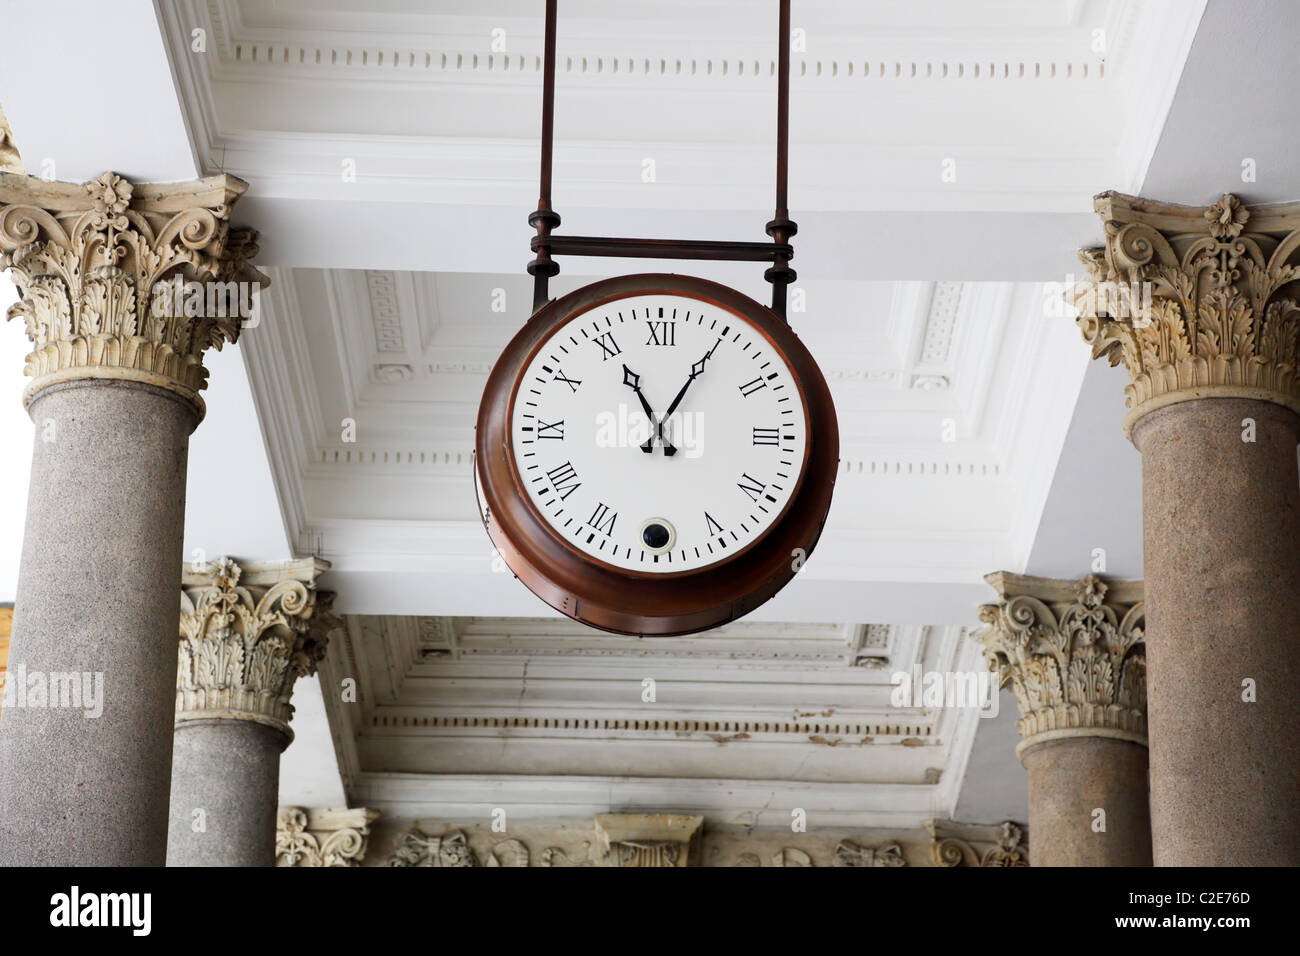 Round clock in a colonnade, Karlovy Vary Stock Photo